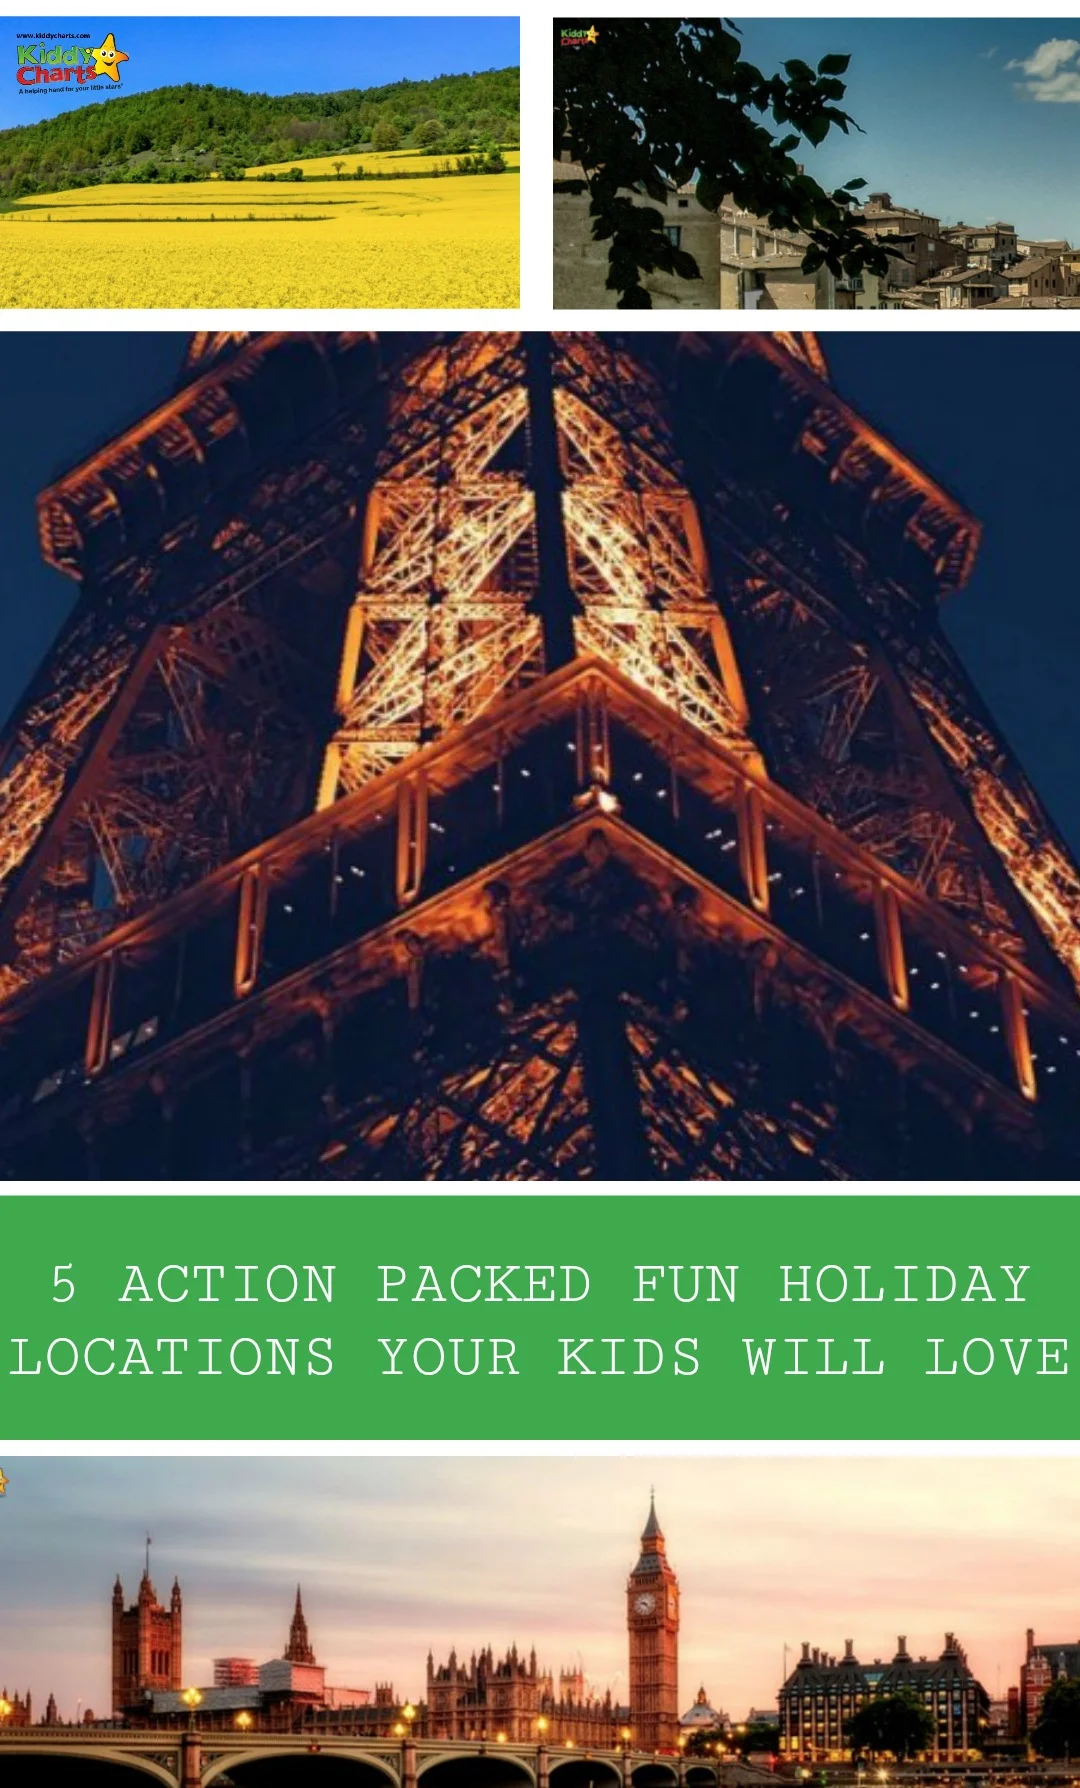 We've got 5 great ideas for holidays with the kids; check them out they might surprise you!